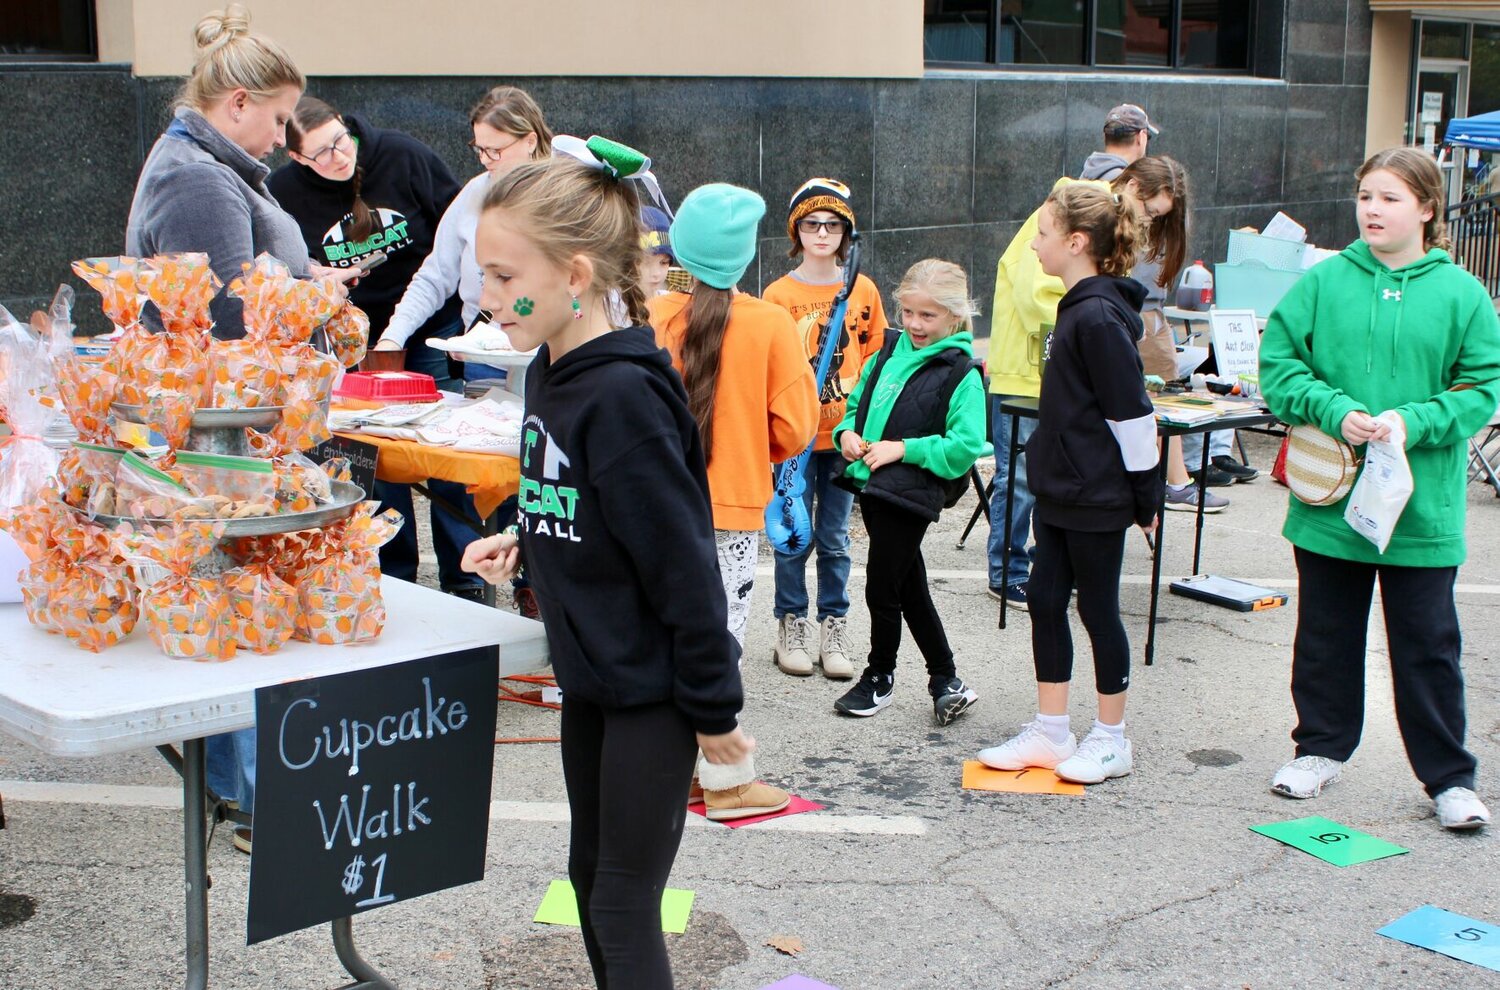 A cupcake walk was held, with winners choosing from a plate piled high with the sugary treats.